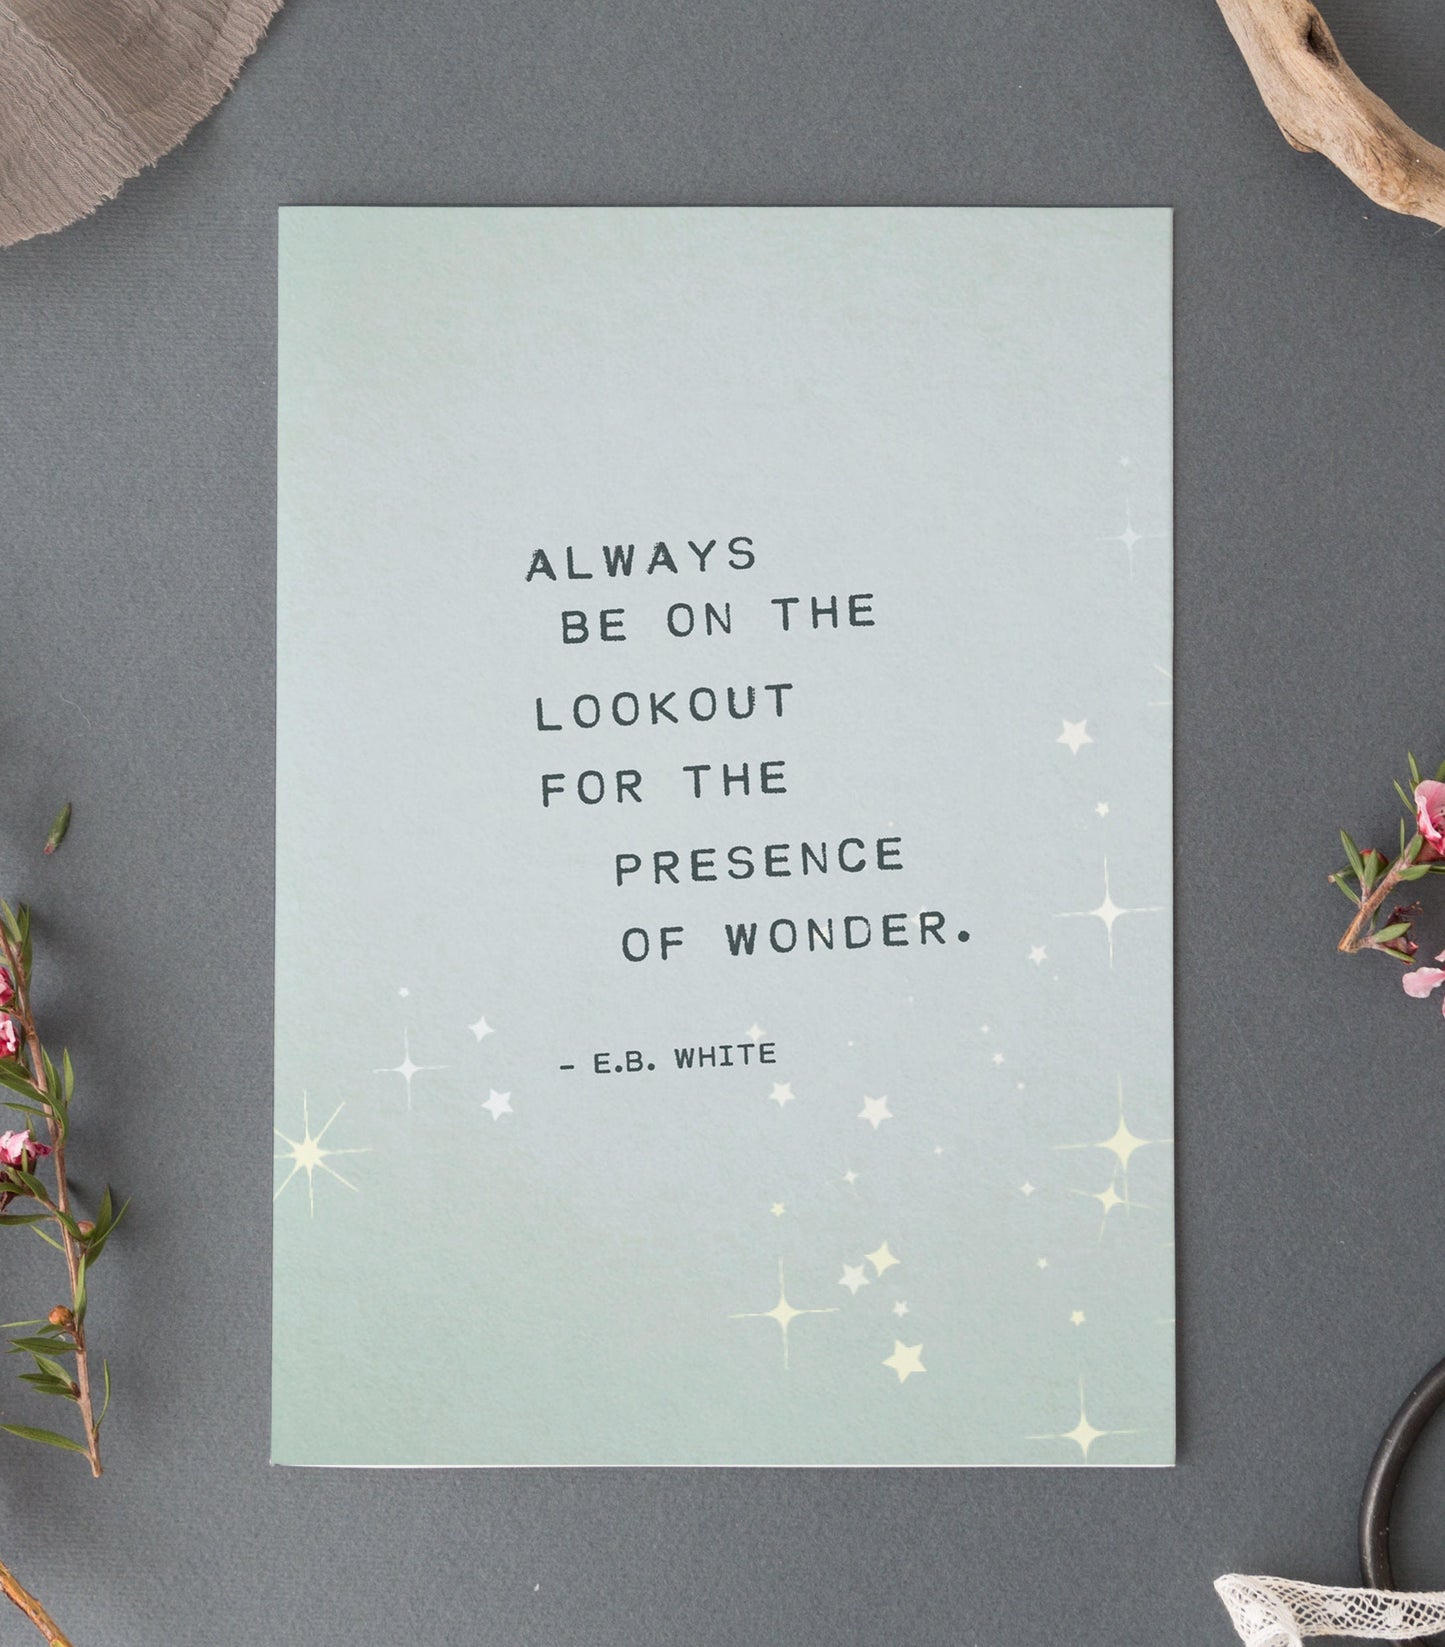 E.B. White quote "Always be on the lookout for the presence of wonder" nursery art